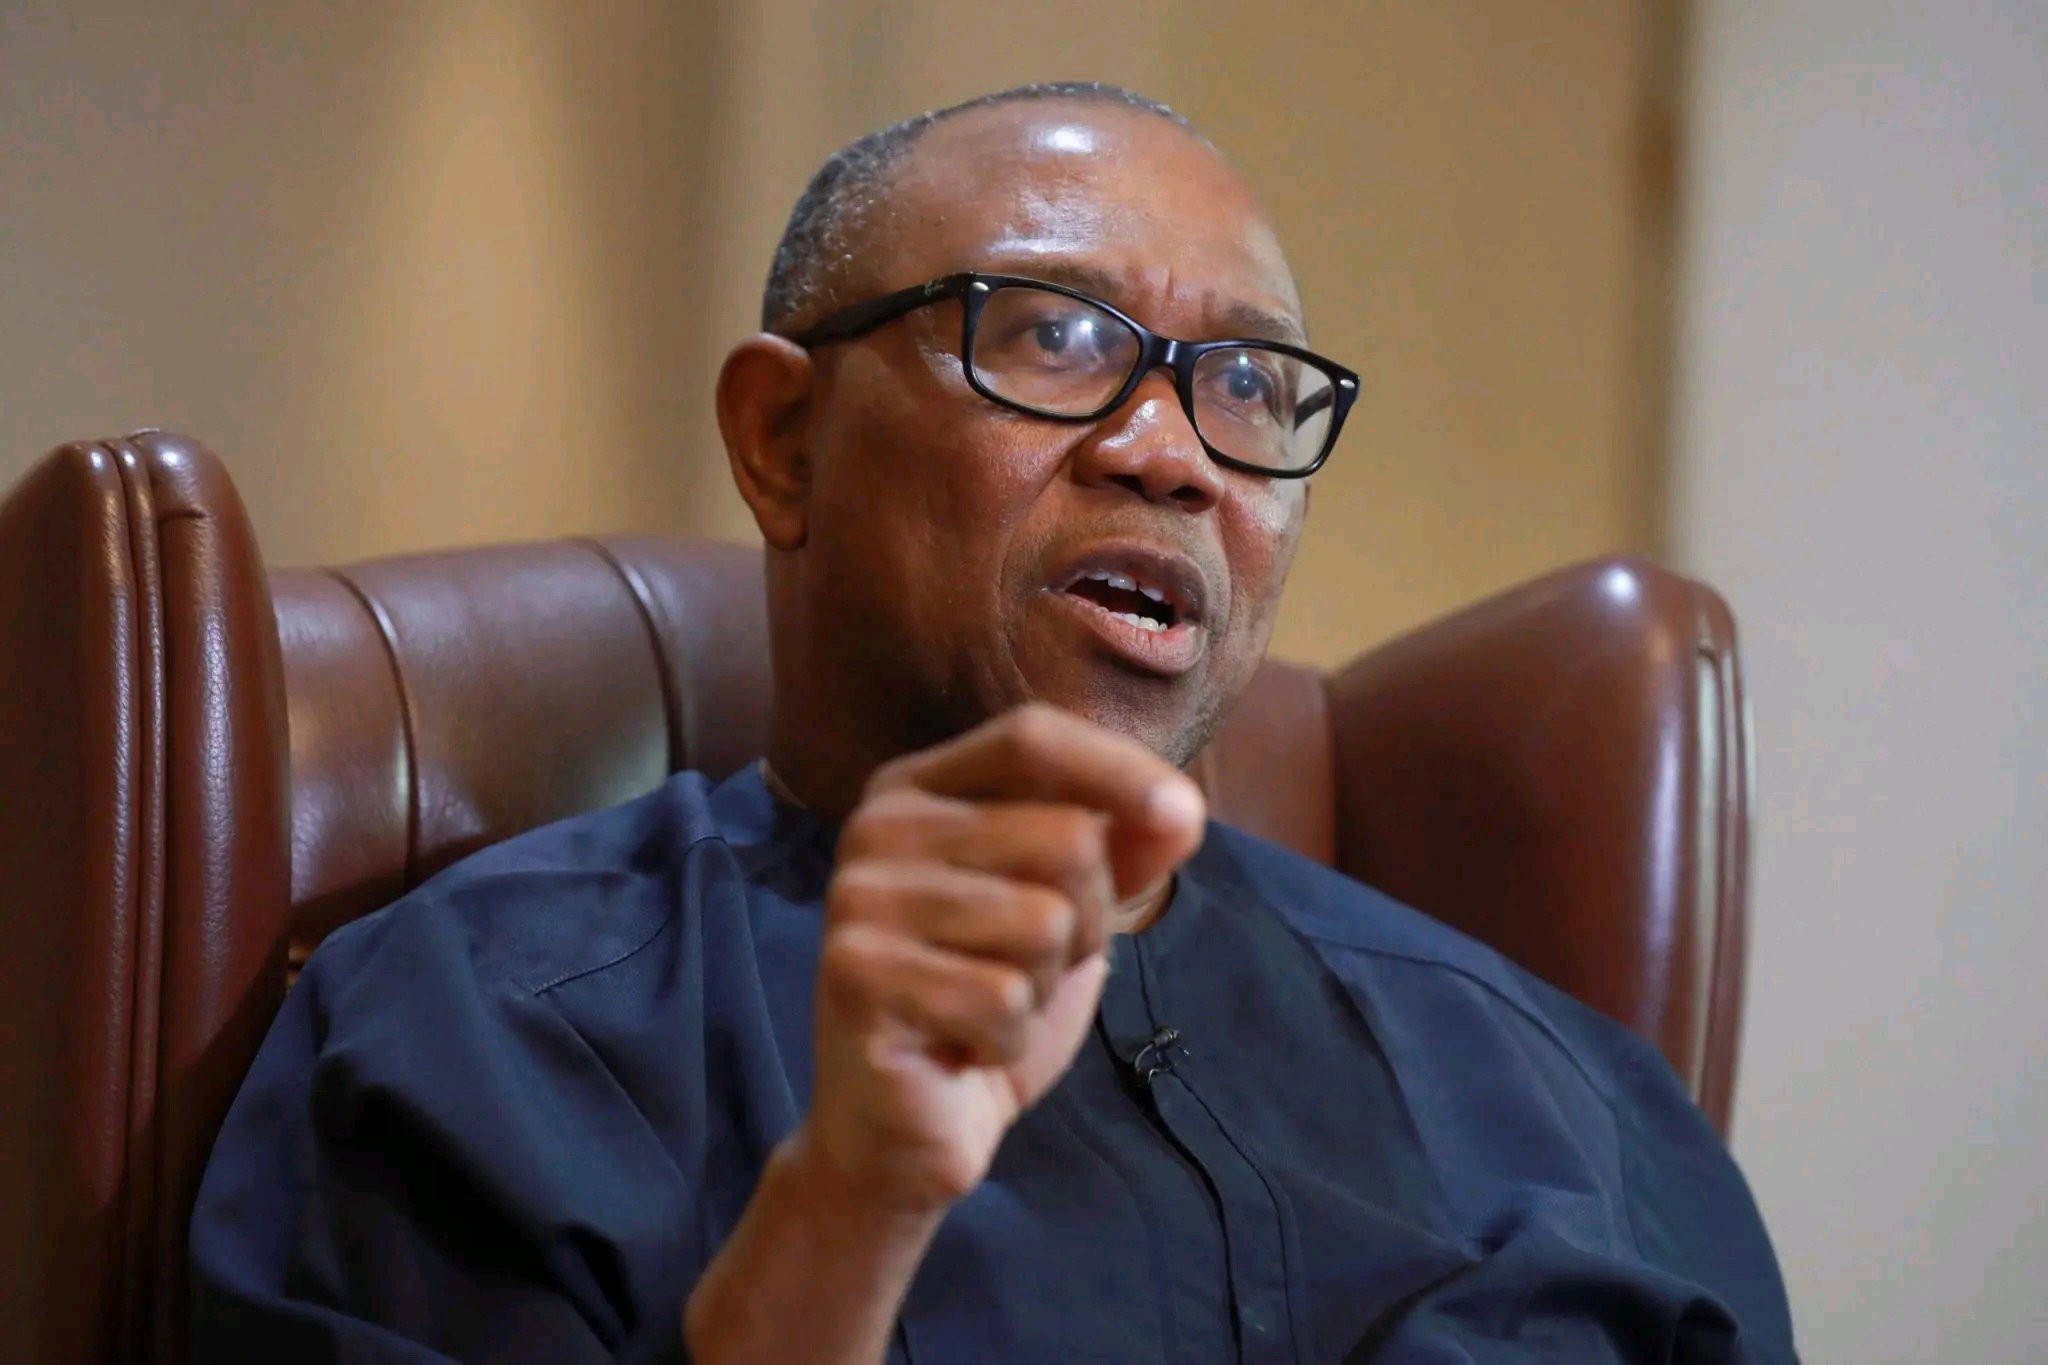 Obi: If you elect me as president, I can remove myself entirely from being answerable to the people